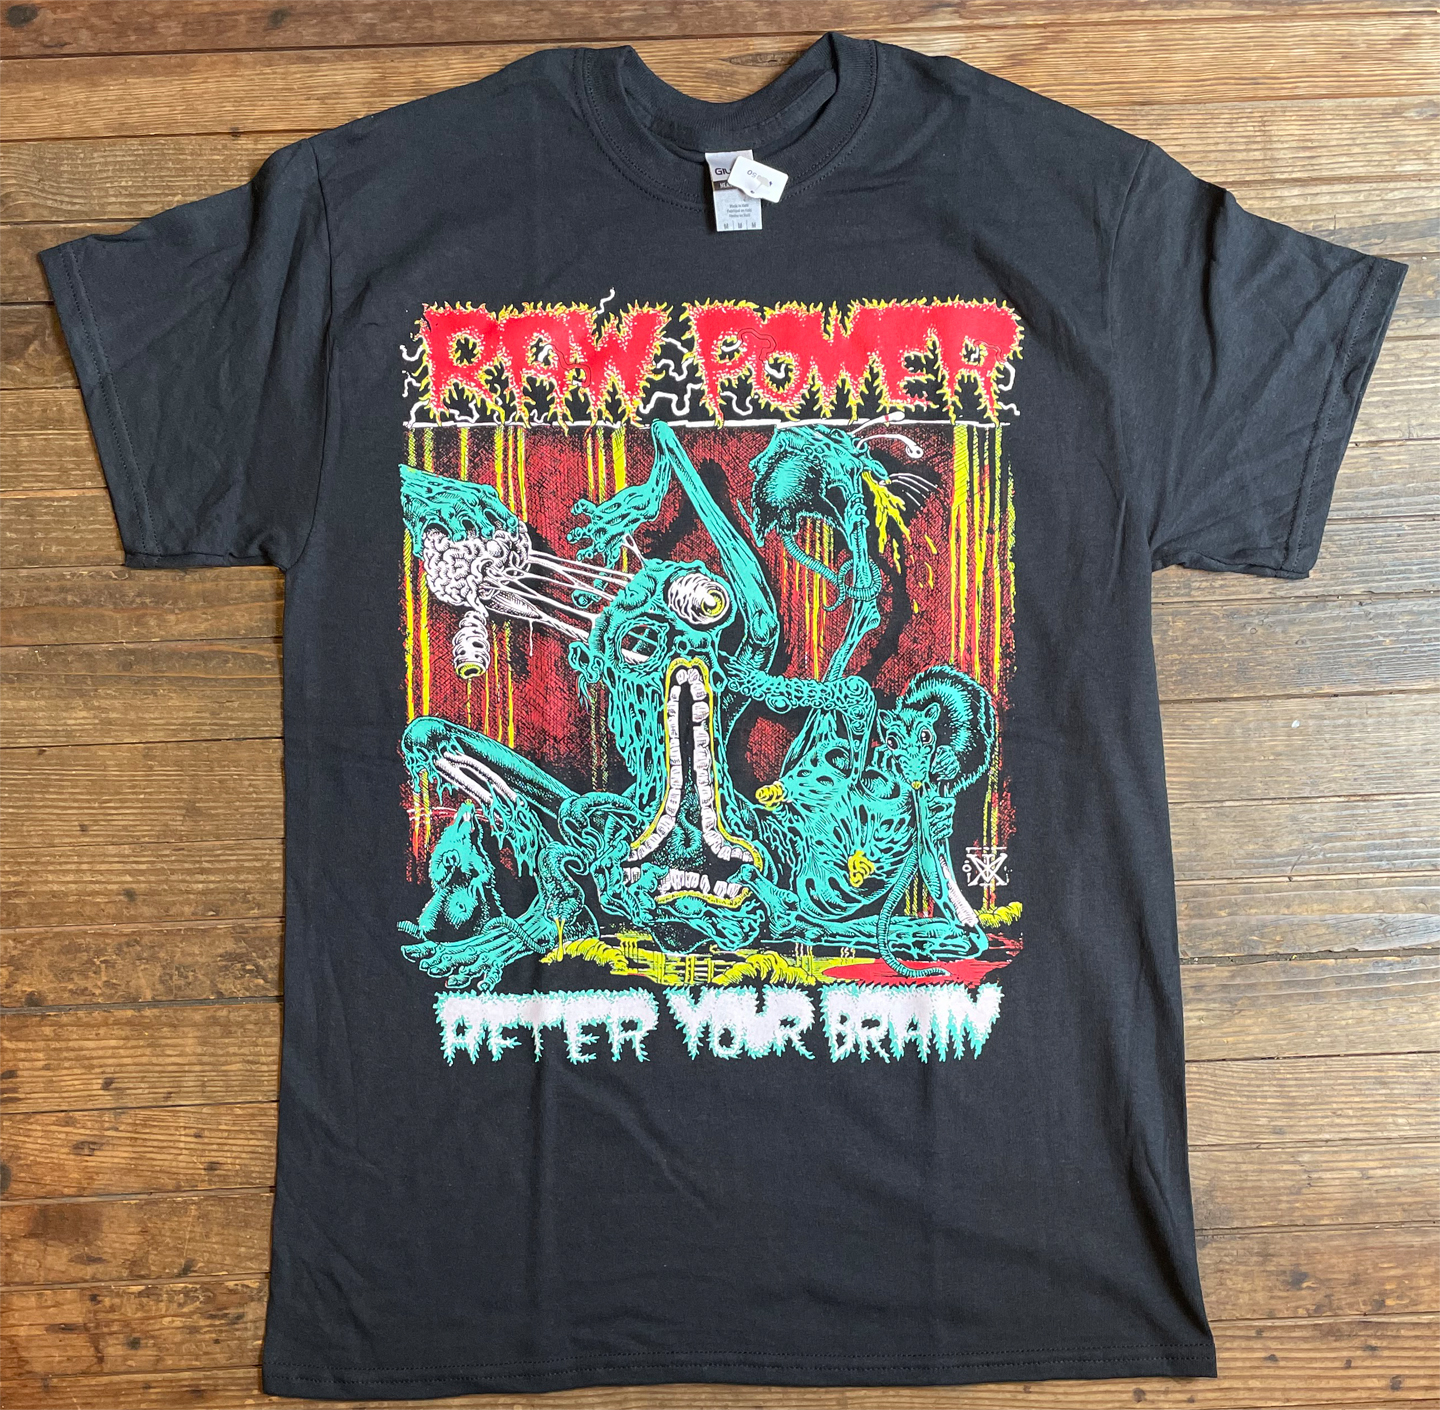 RAW POWER Tシャツ AFTER YOUR BRAIN オフィシャル!